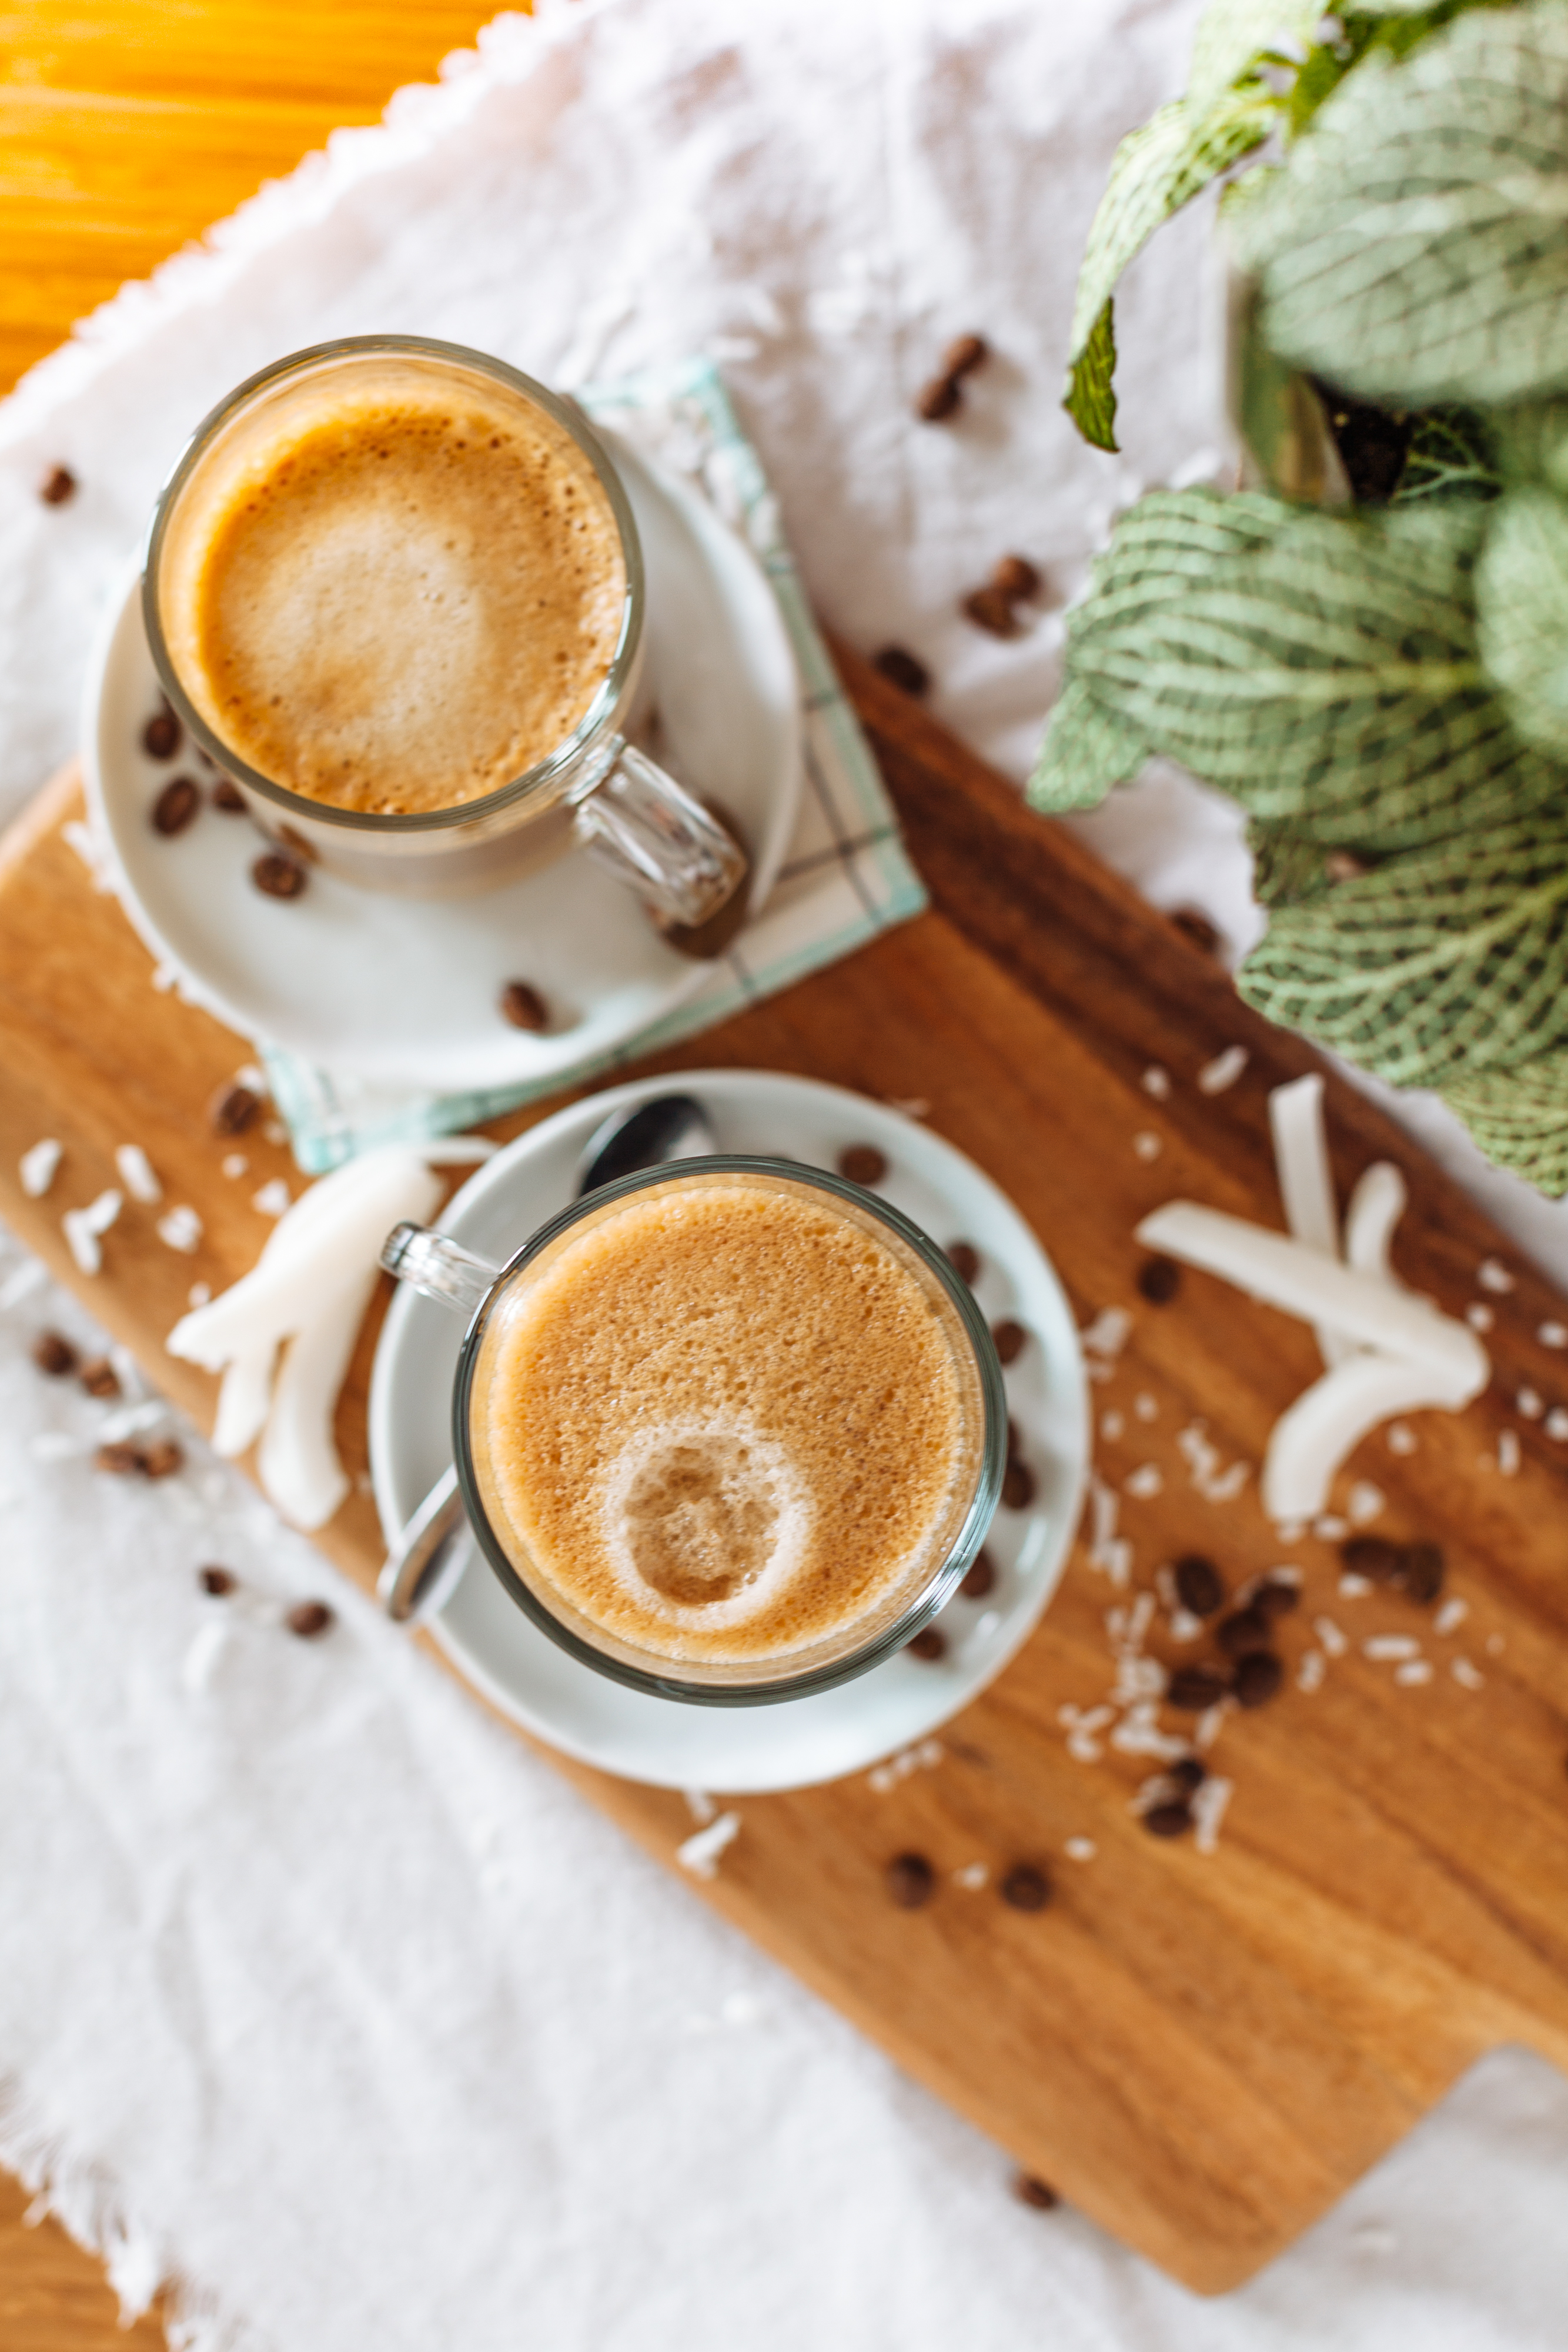 Have you tried the new Coffee-mate Creamers yet? They're divine! Here's how to enjoy them over a gal pal coffee date | bygabriella.co